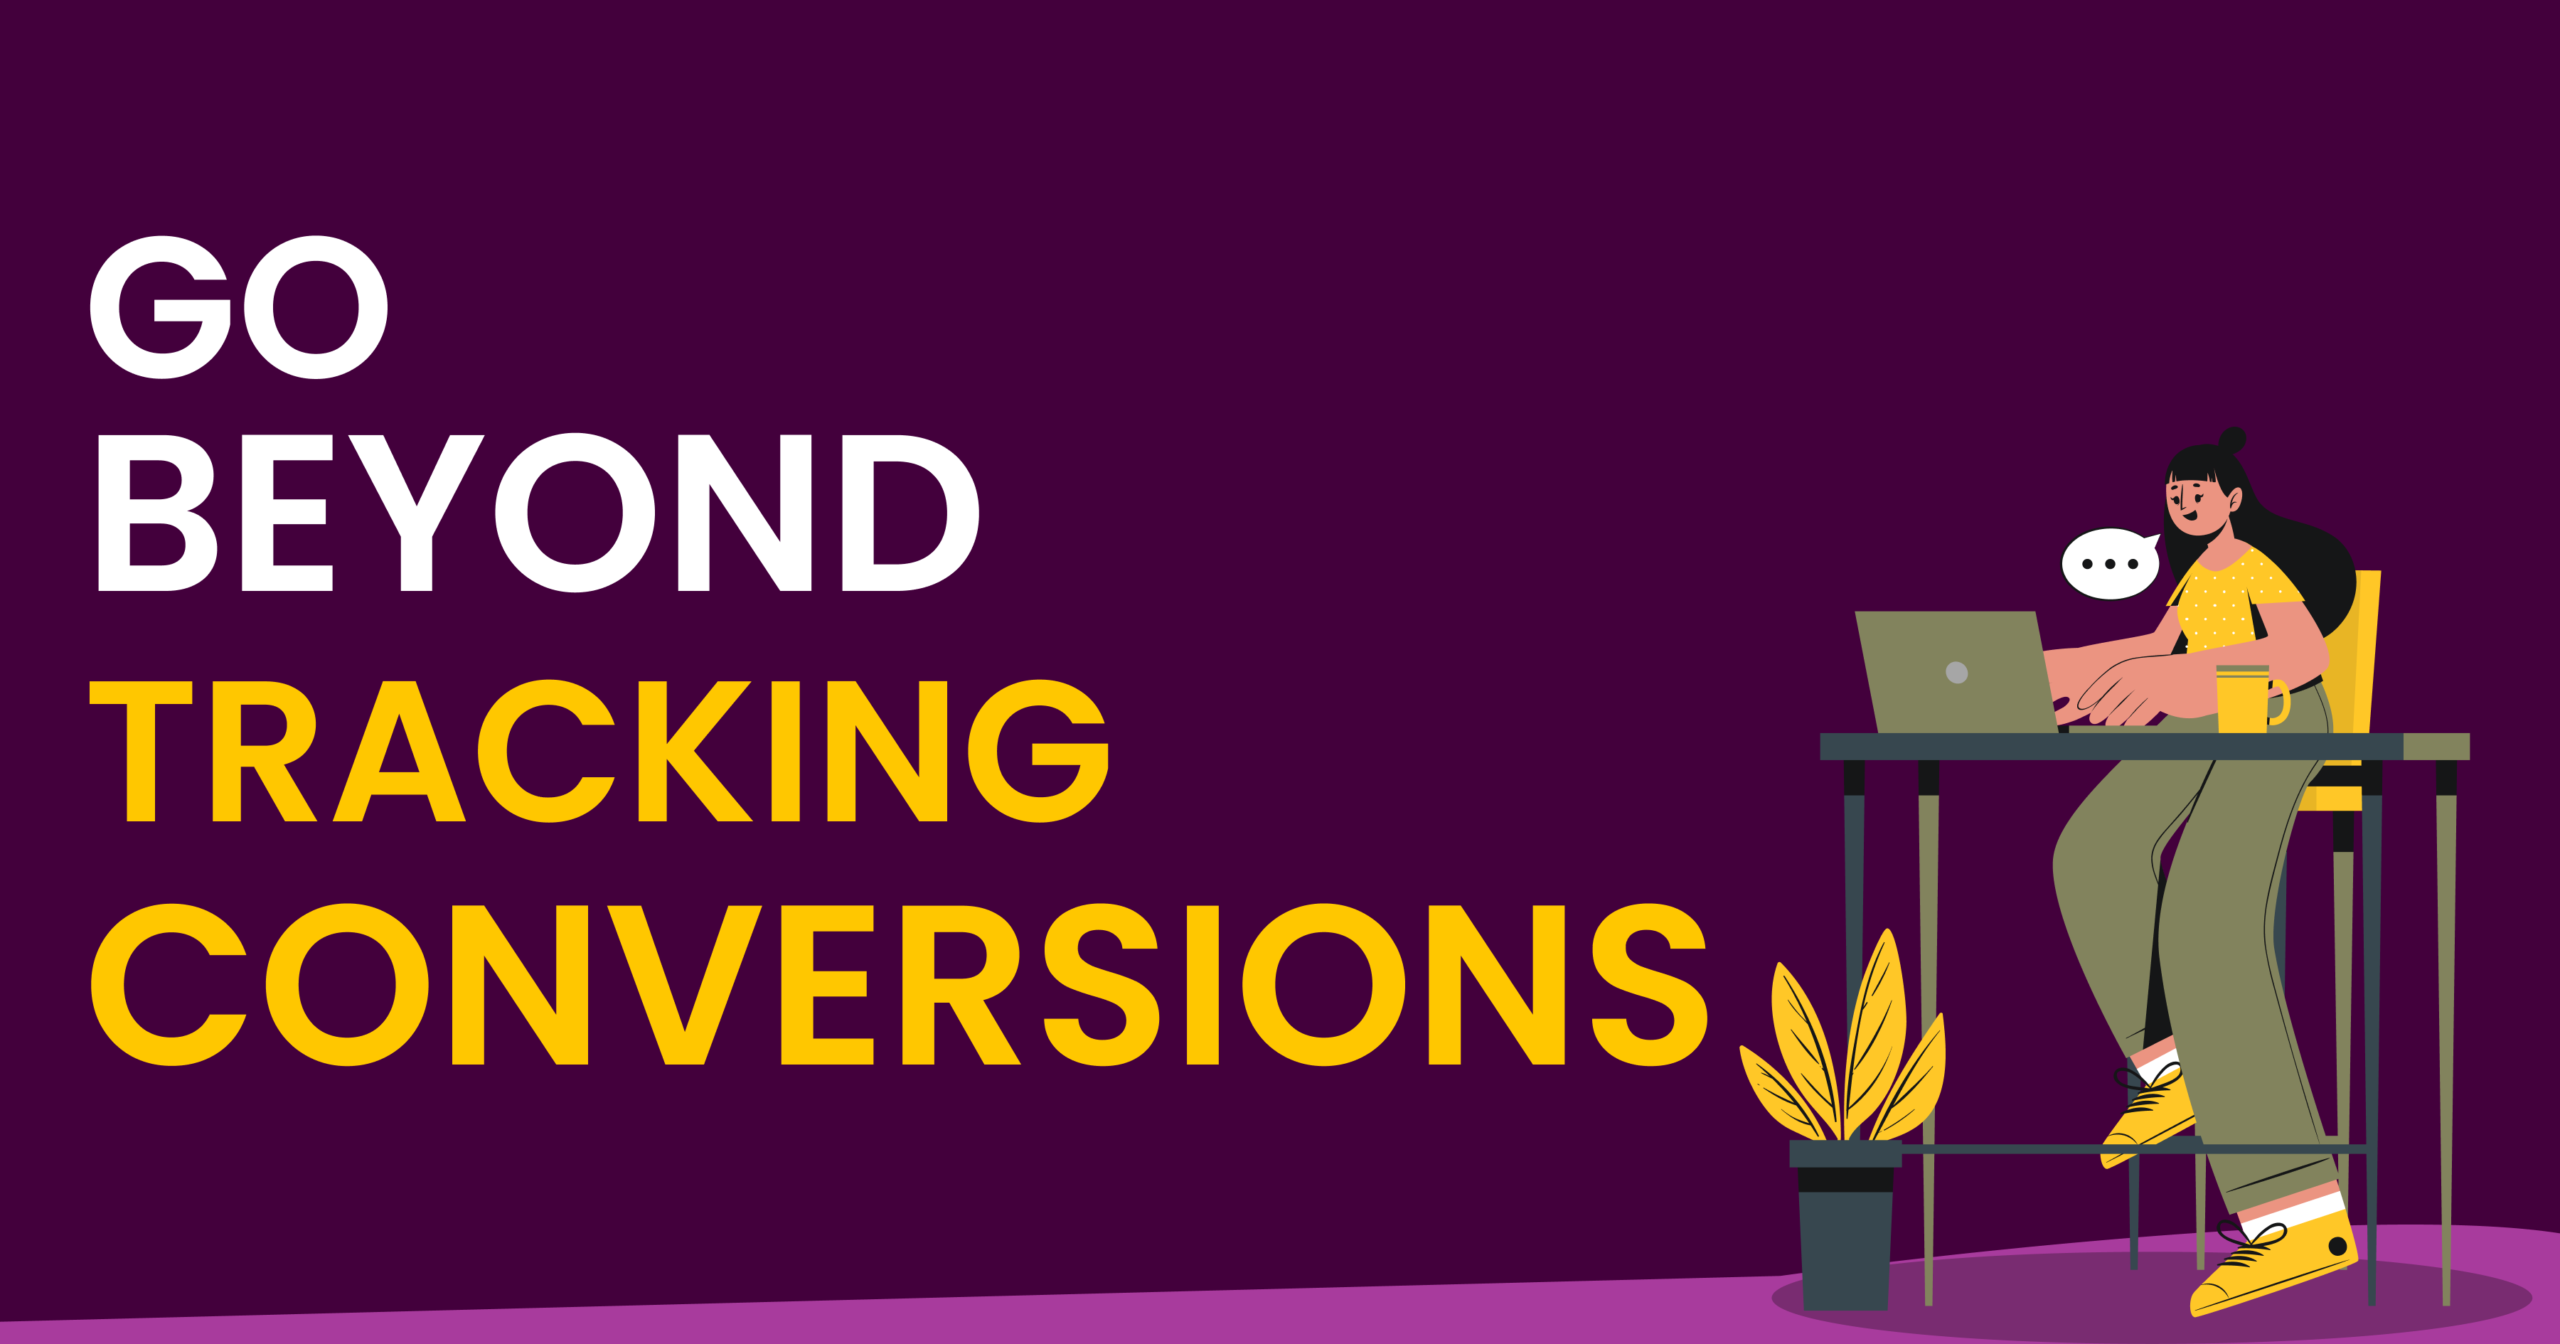 Go beyond Tracking conversions